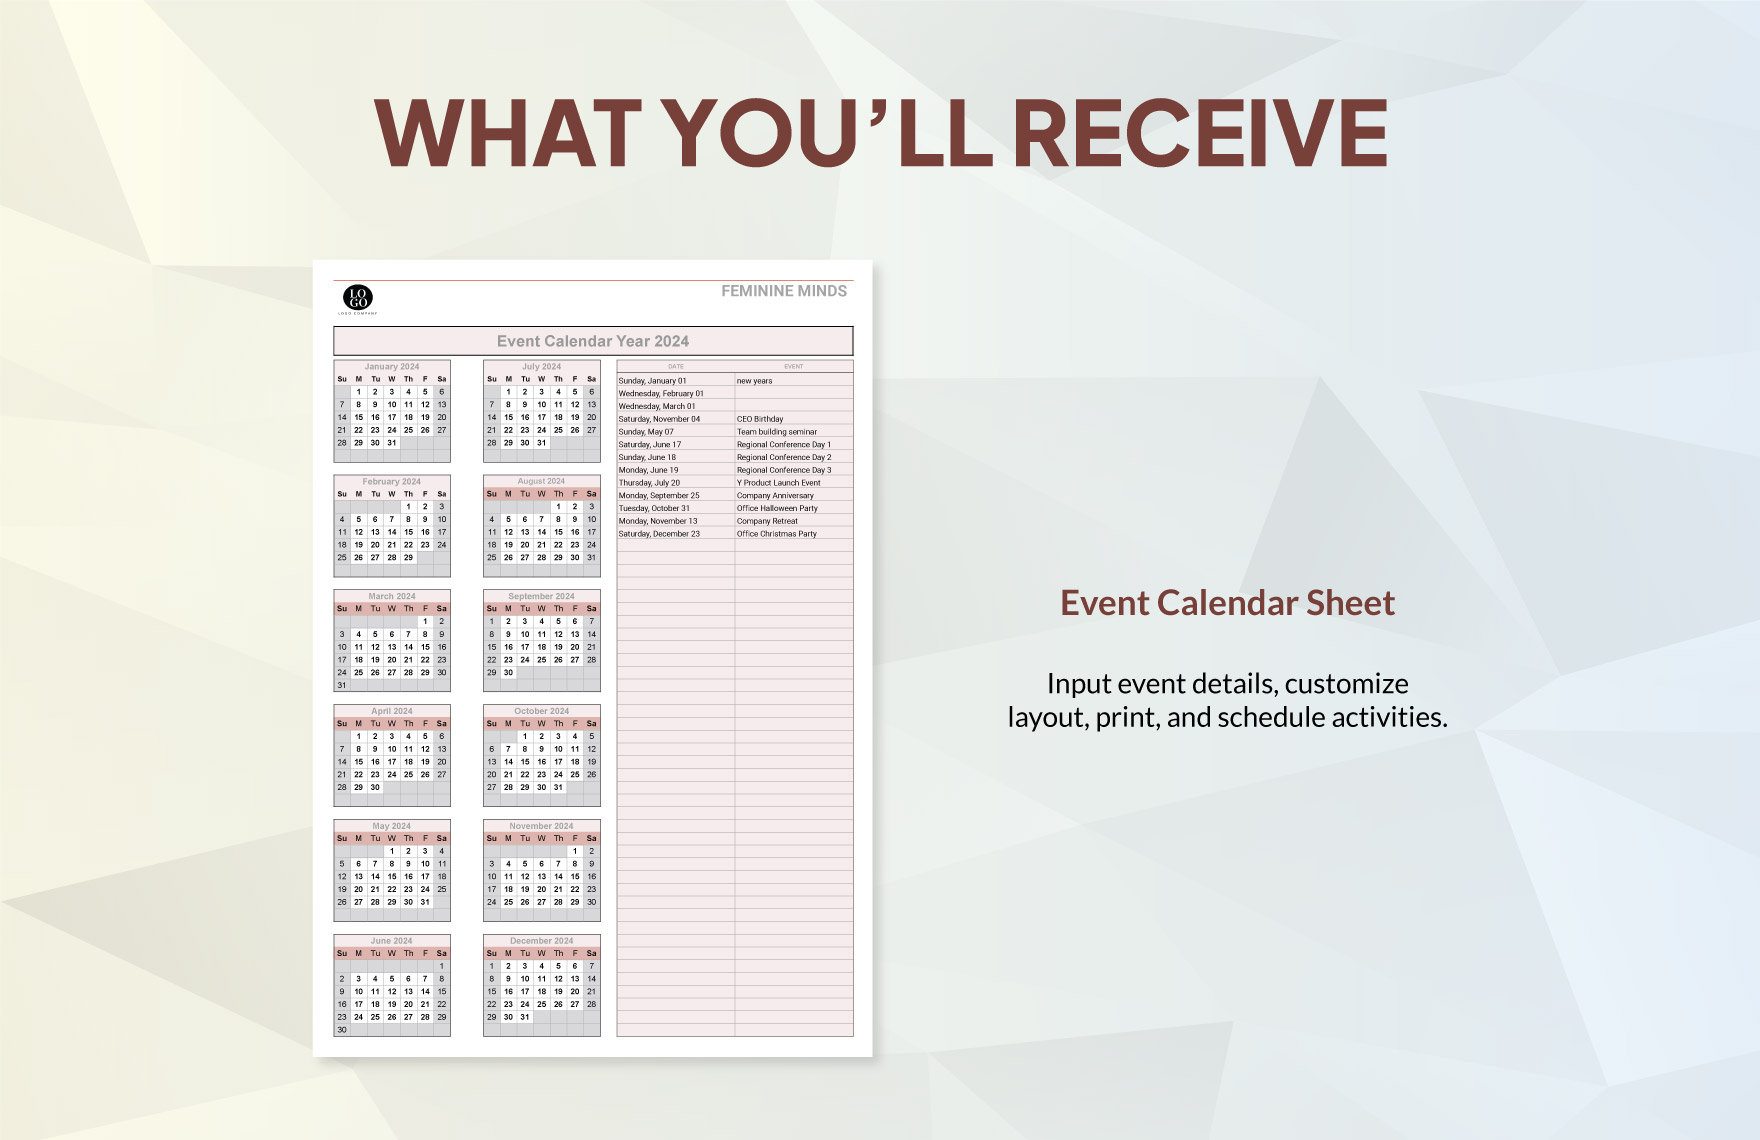 Any Year Event Calendar Template